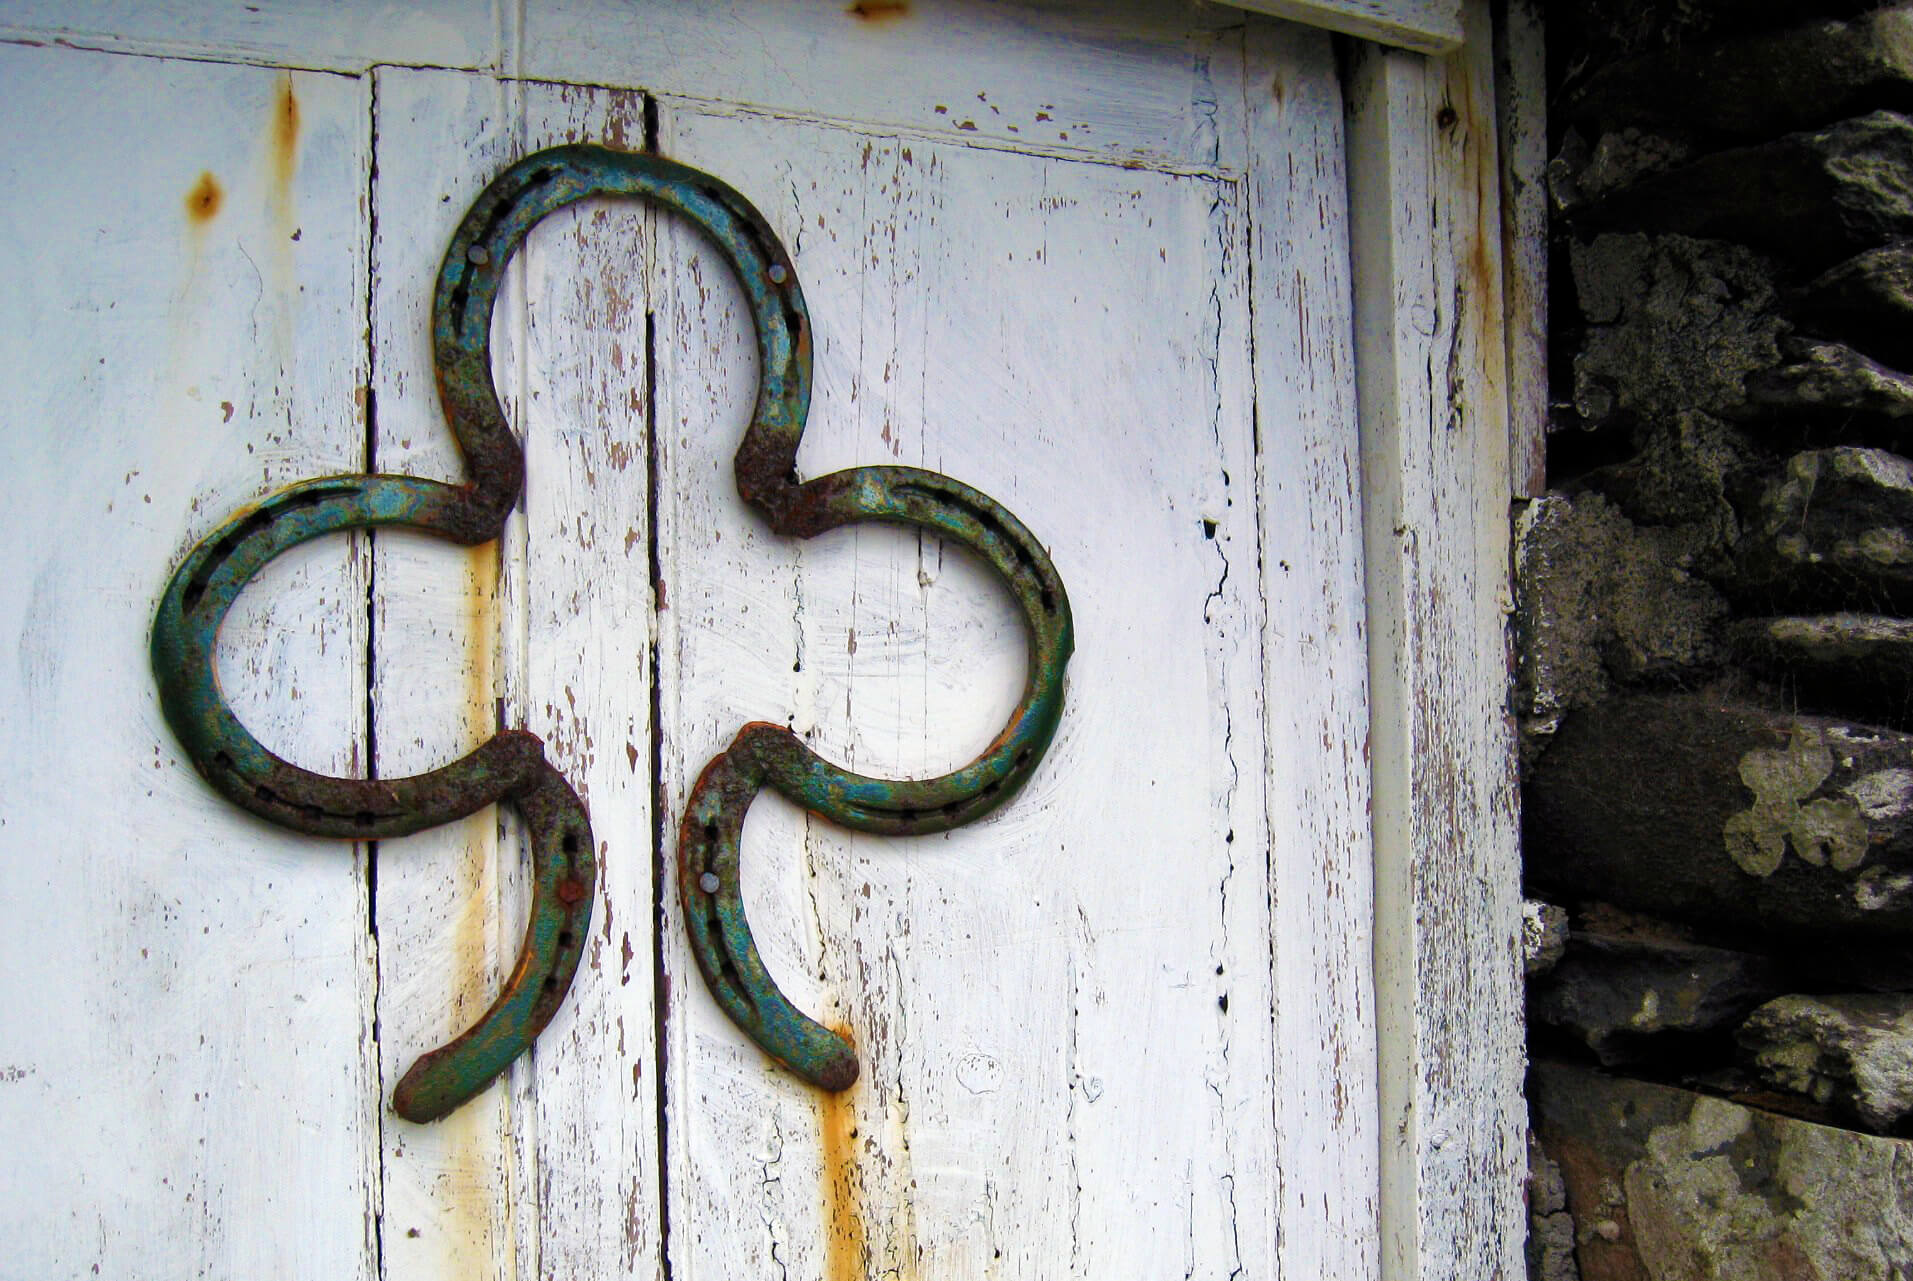 Clover made from horseshoes photo taken in Dingle, Ireland by Kathy Beymer